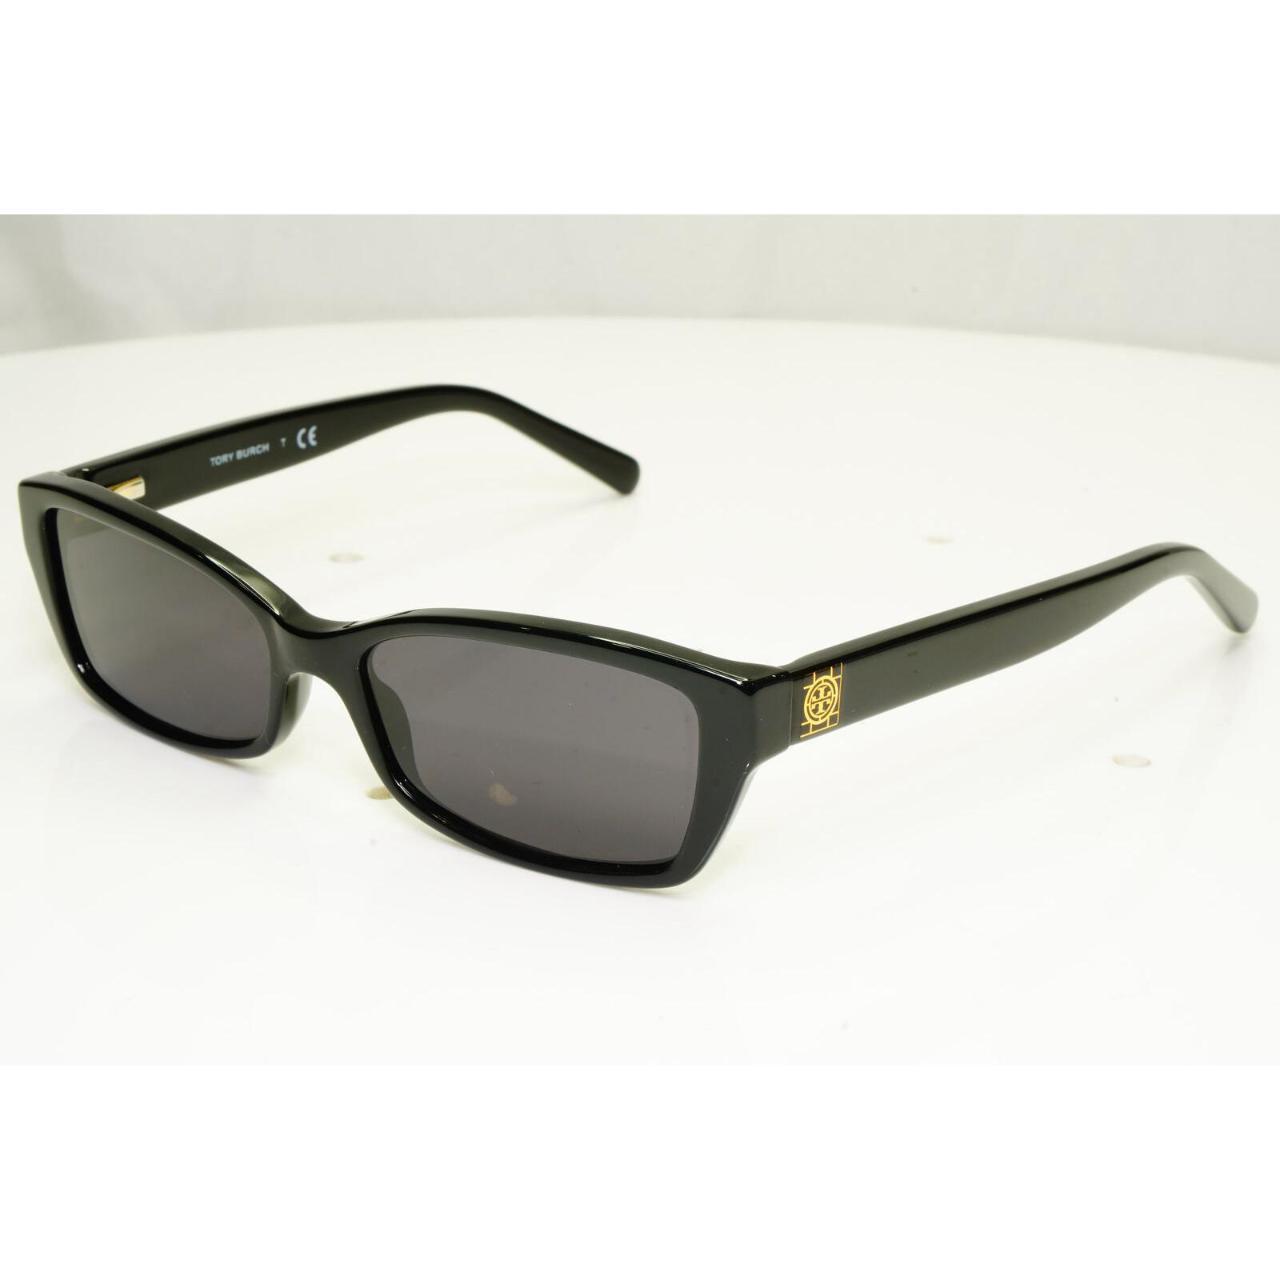 Product Image 1 - These sunglasses and all other